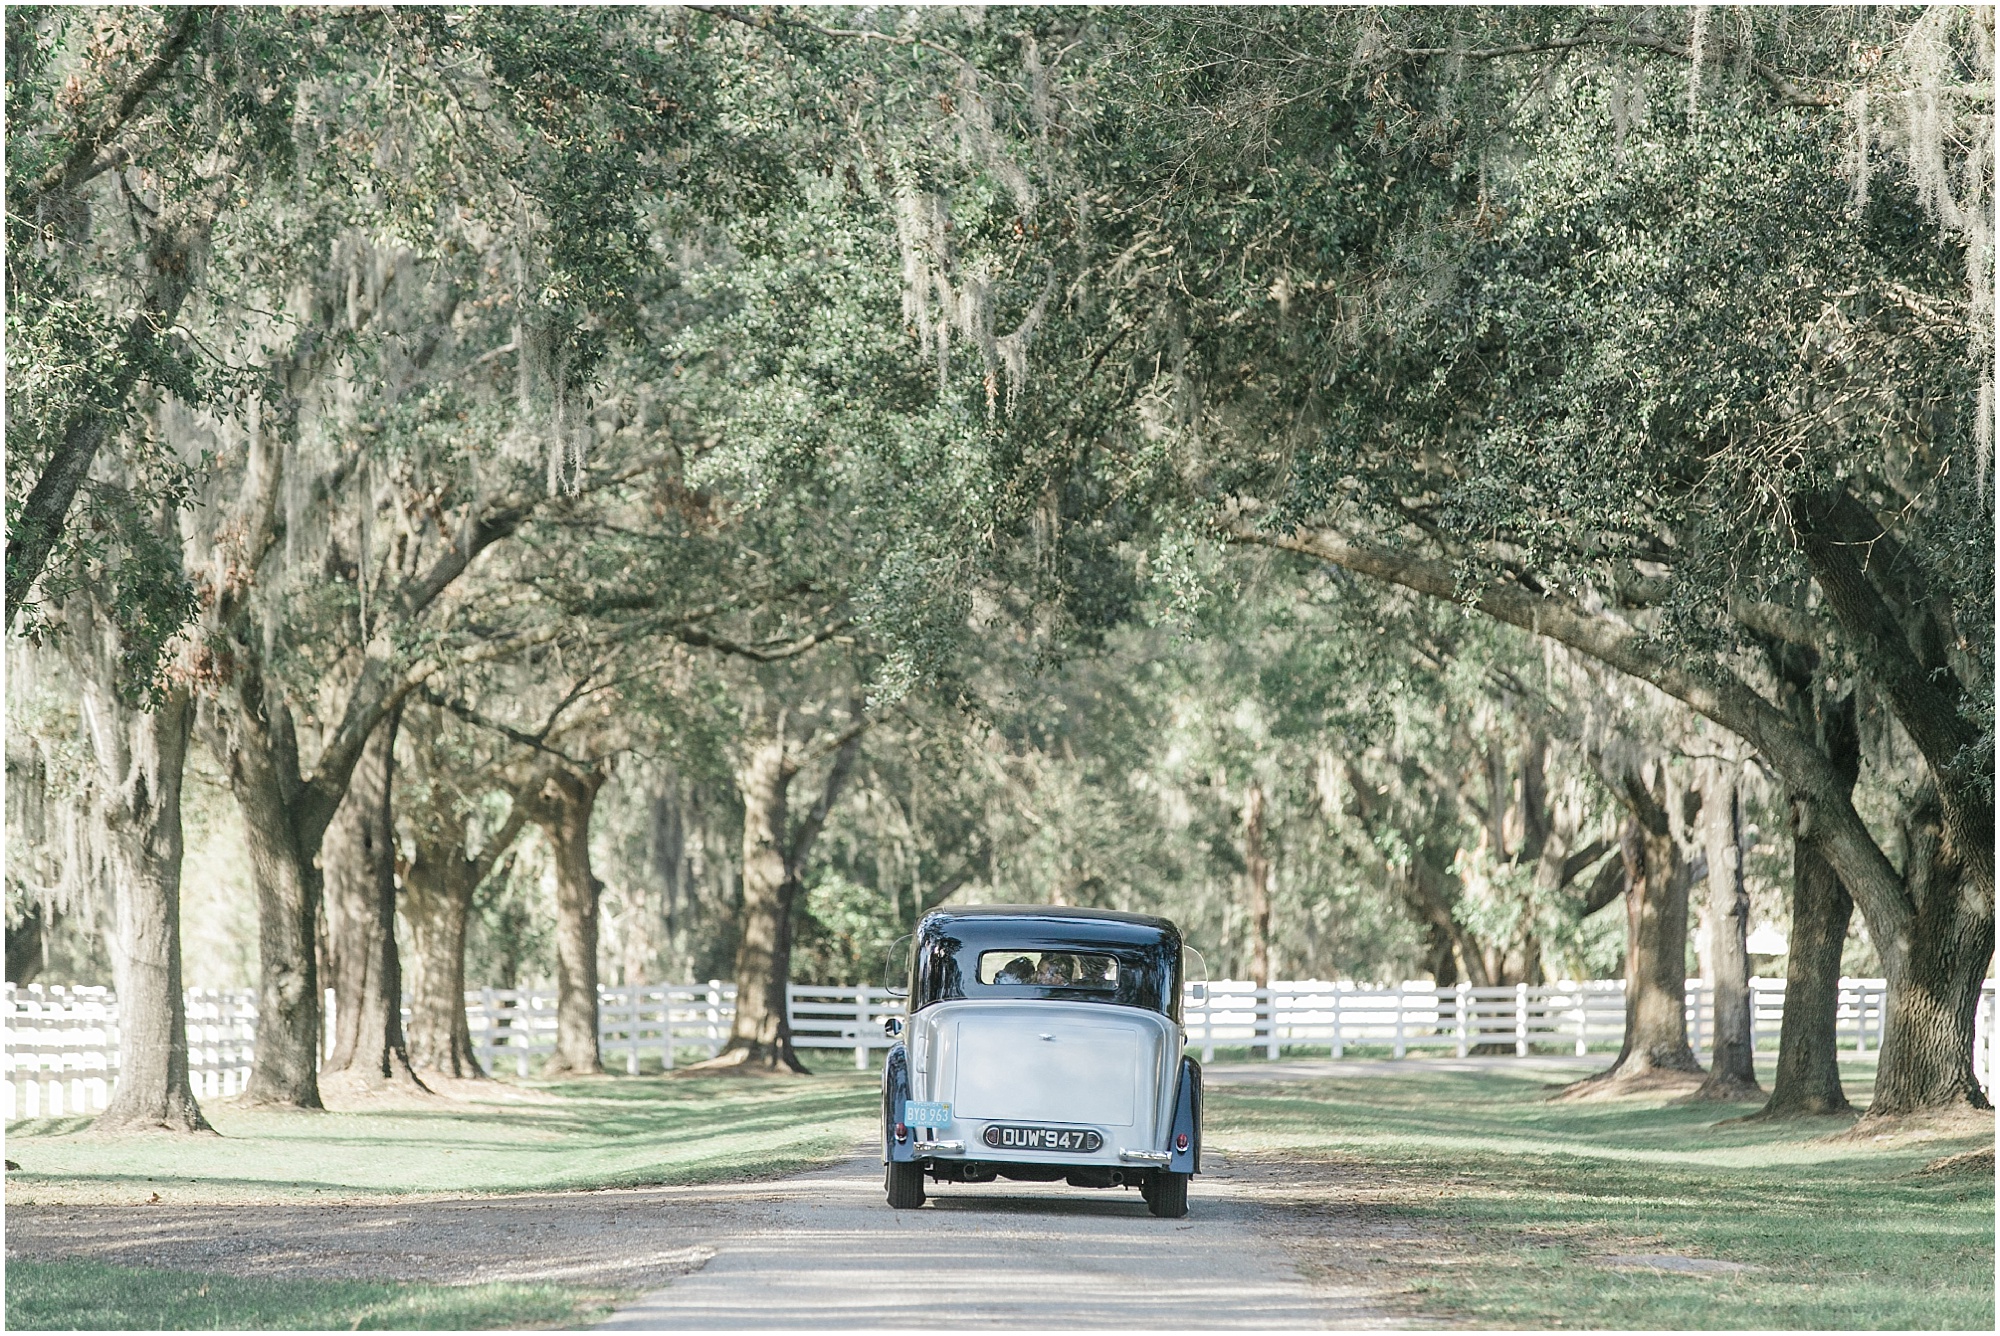 Car driving away from one of our picks in the Top Five Central Florida Wedding Venues